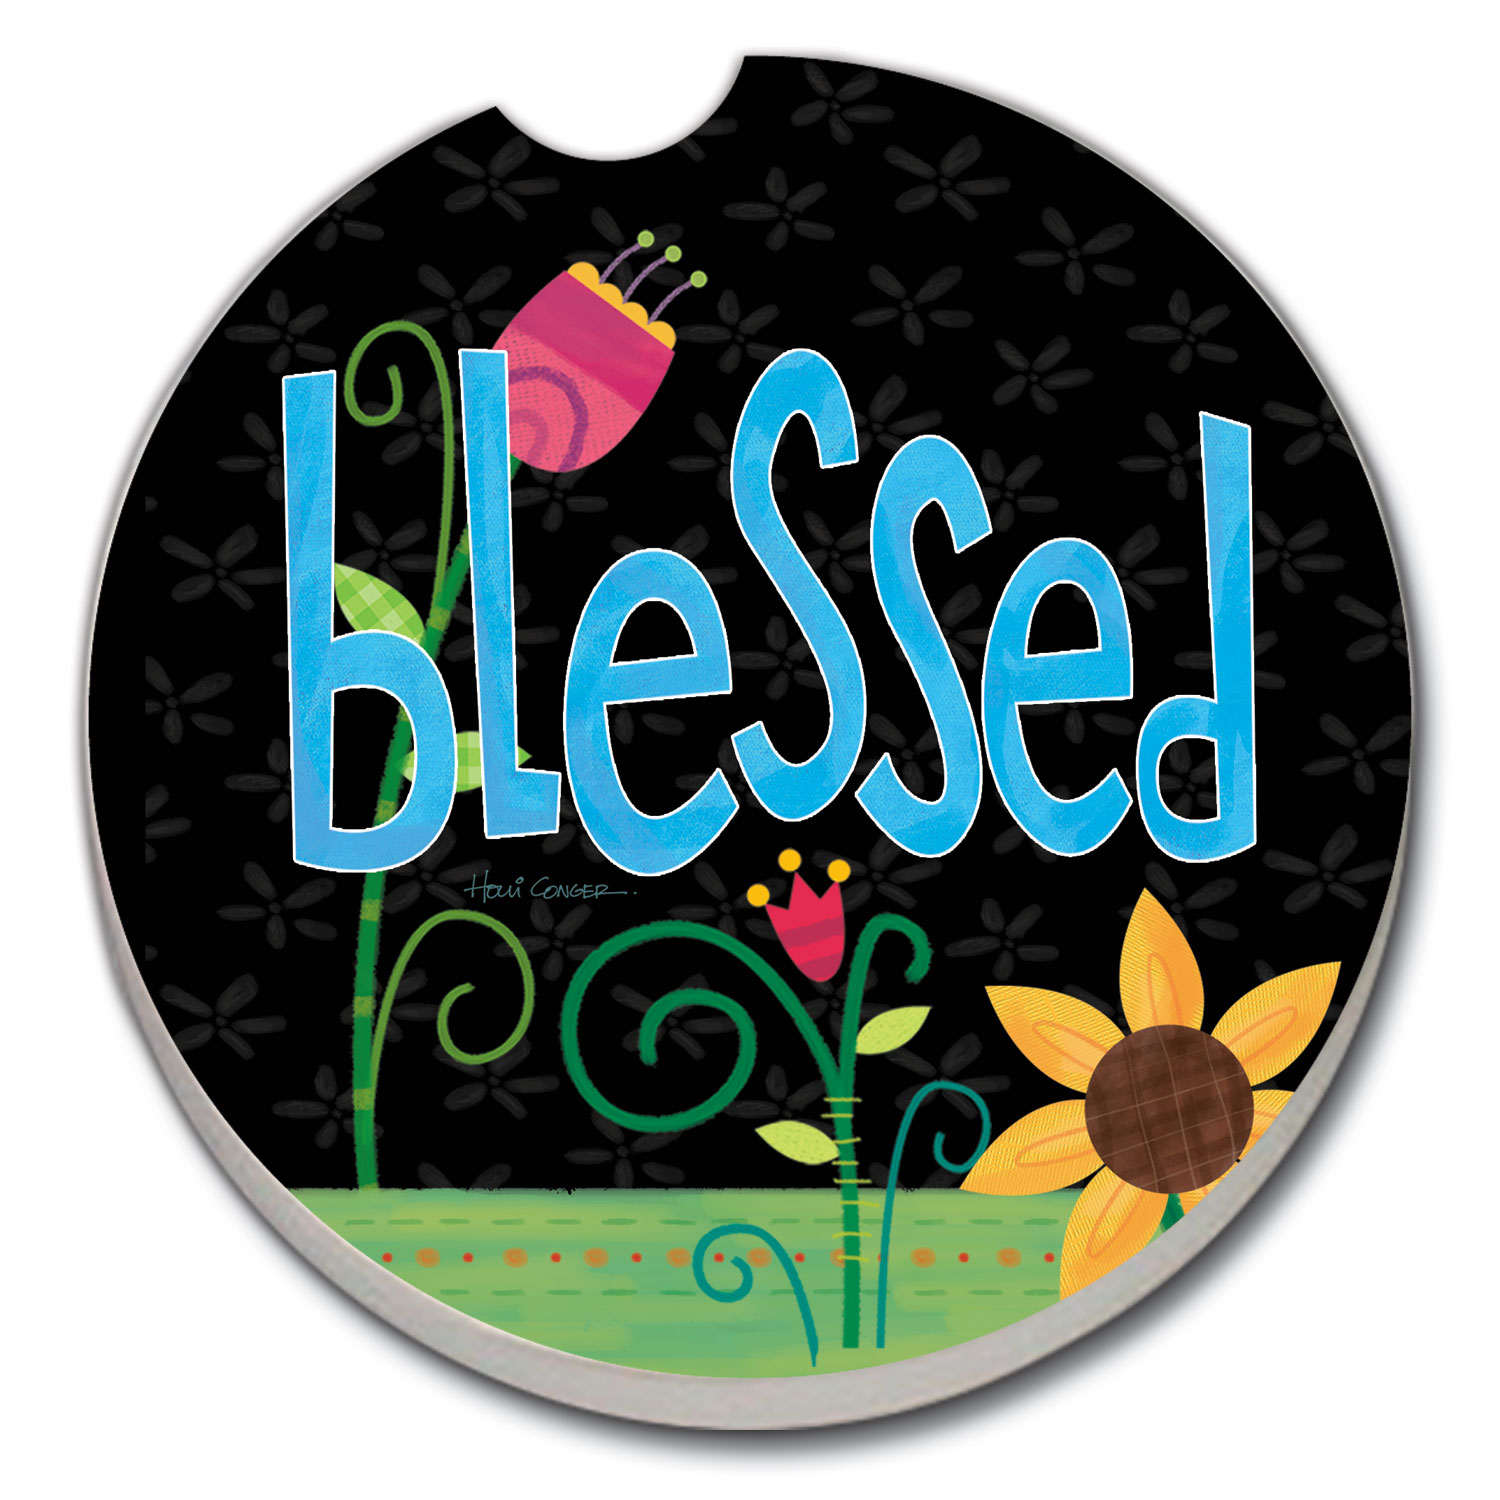 08798: BLESSED ABSORBENT STONE CAR COASTER - COUNTER ART